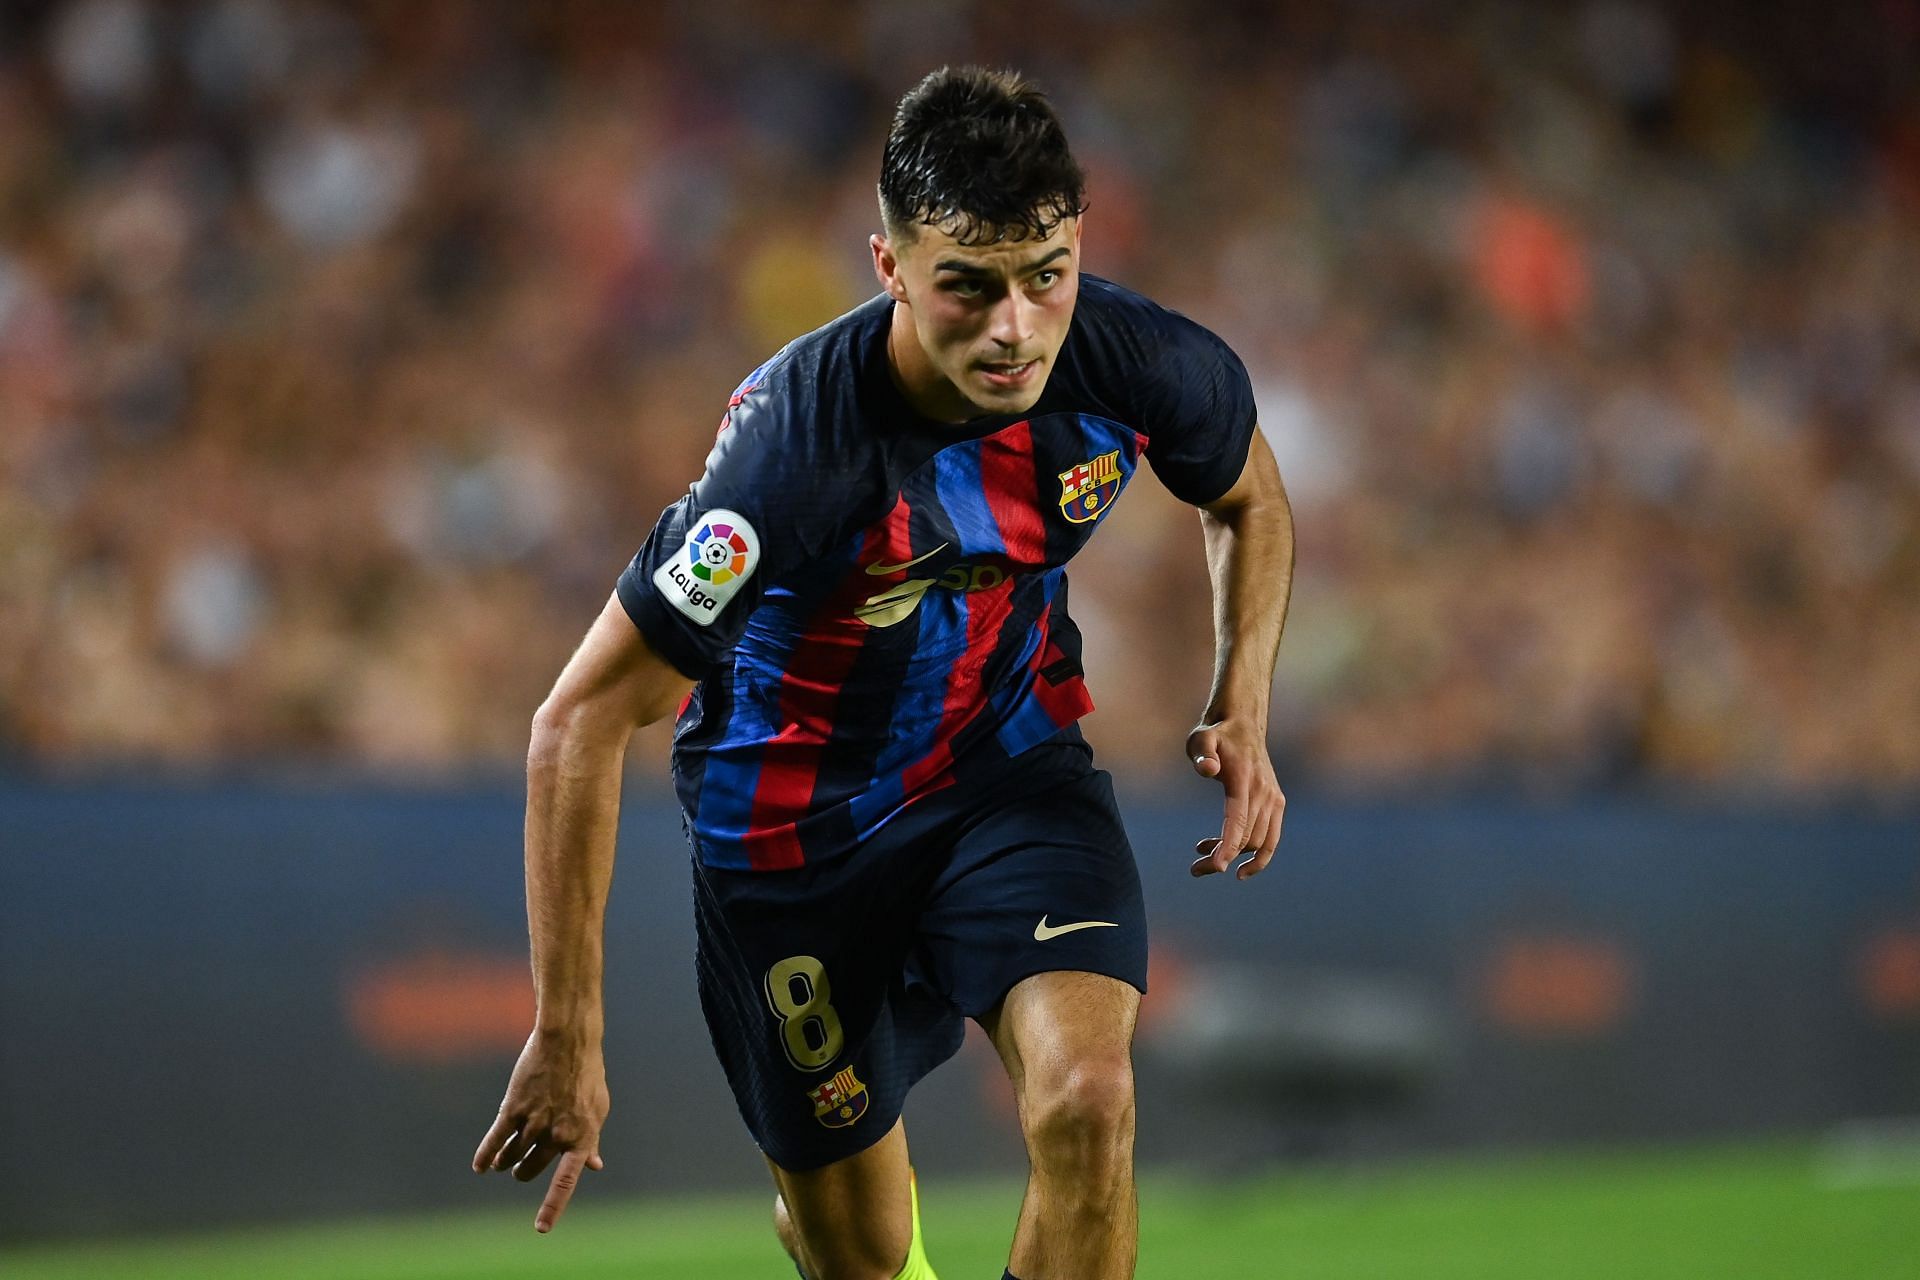 Pedri has quickly developed into an absolute star in midfield for Barcelona and Spain.